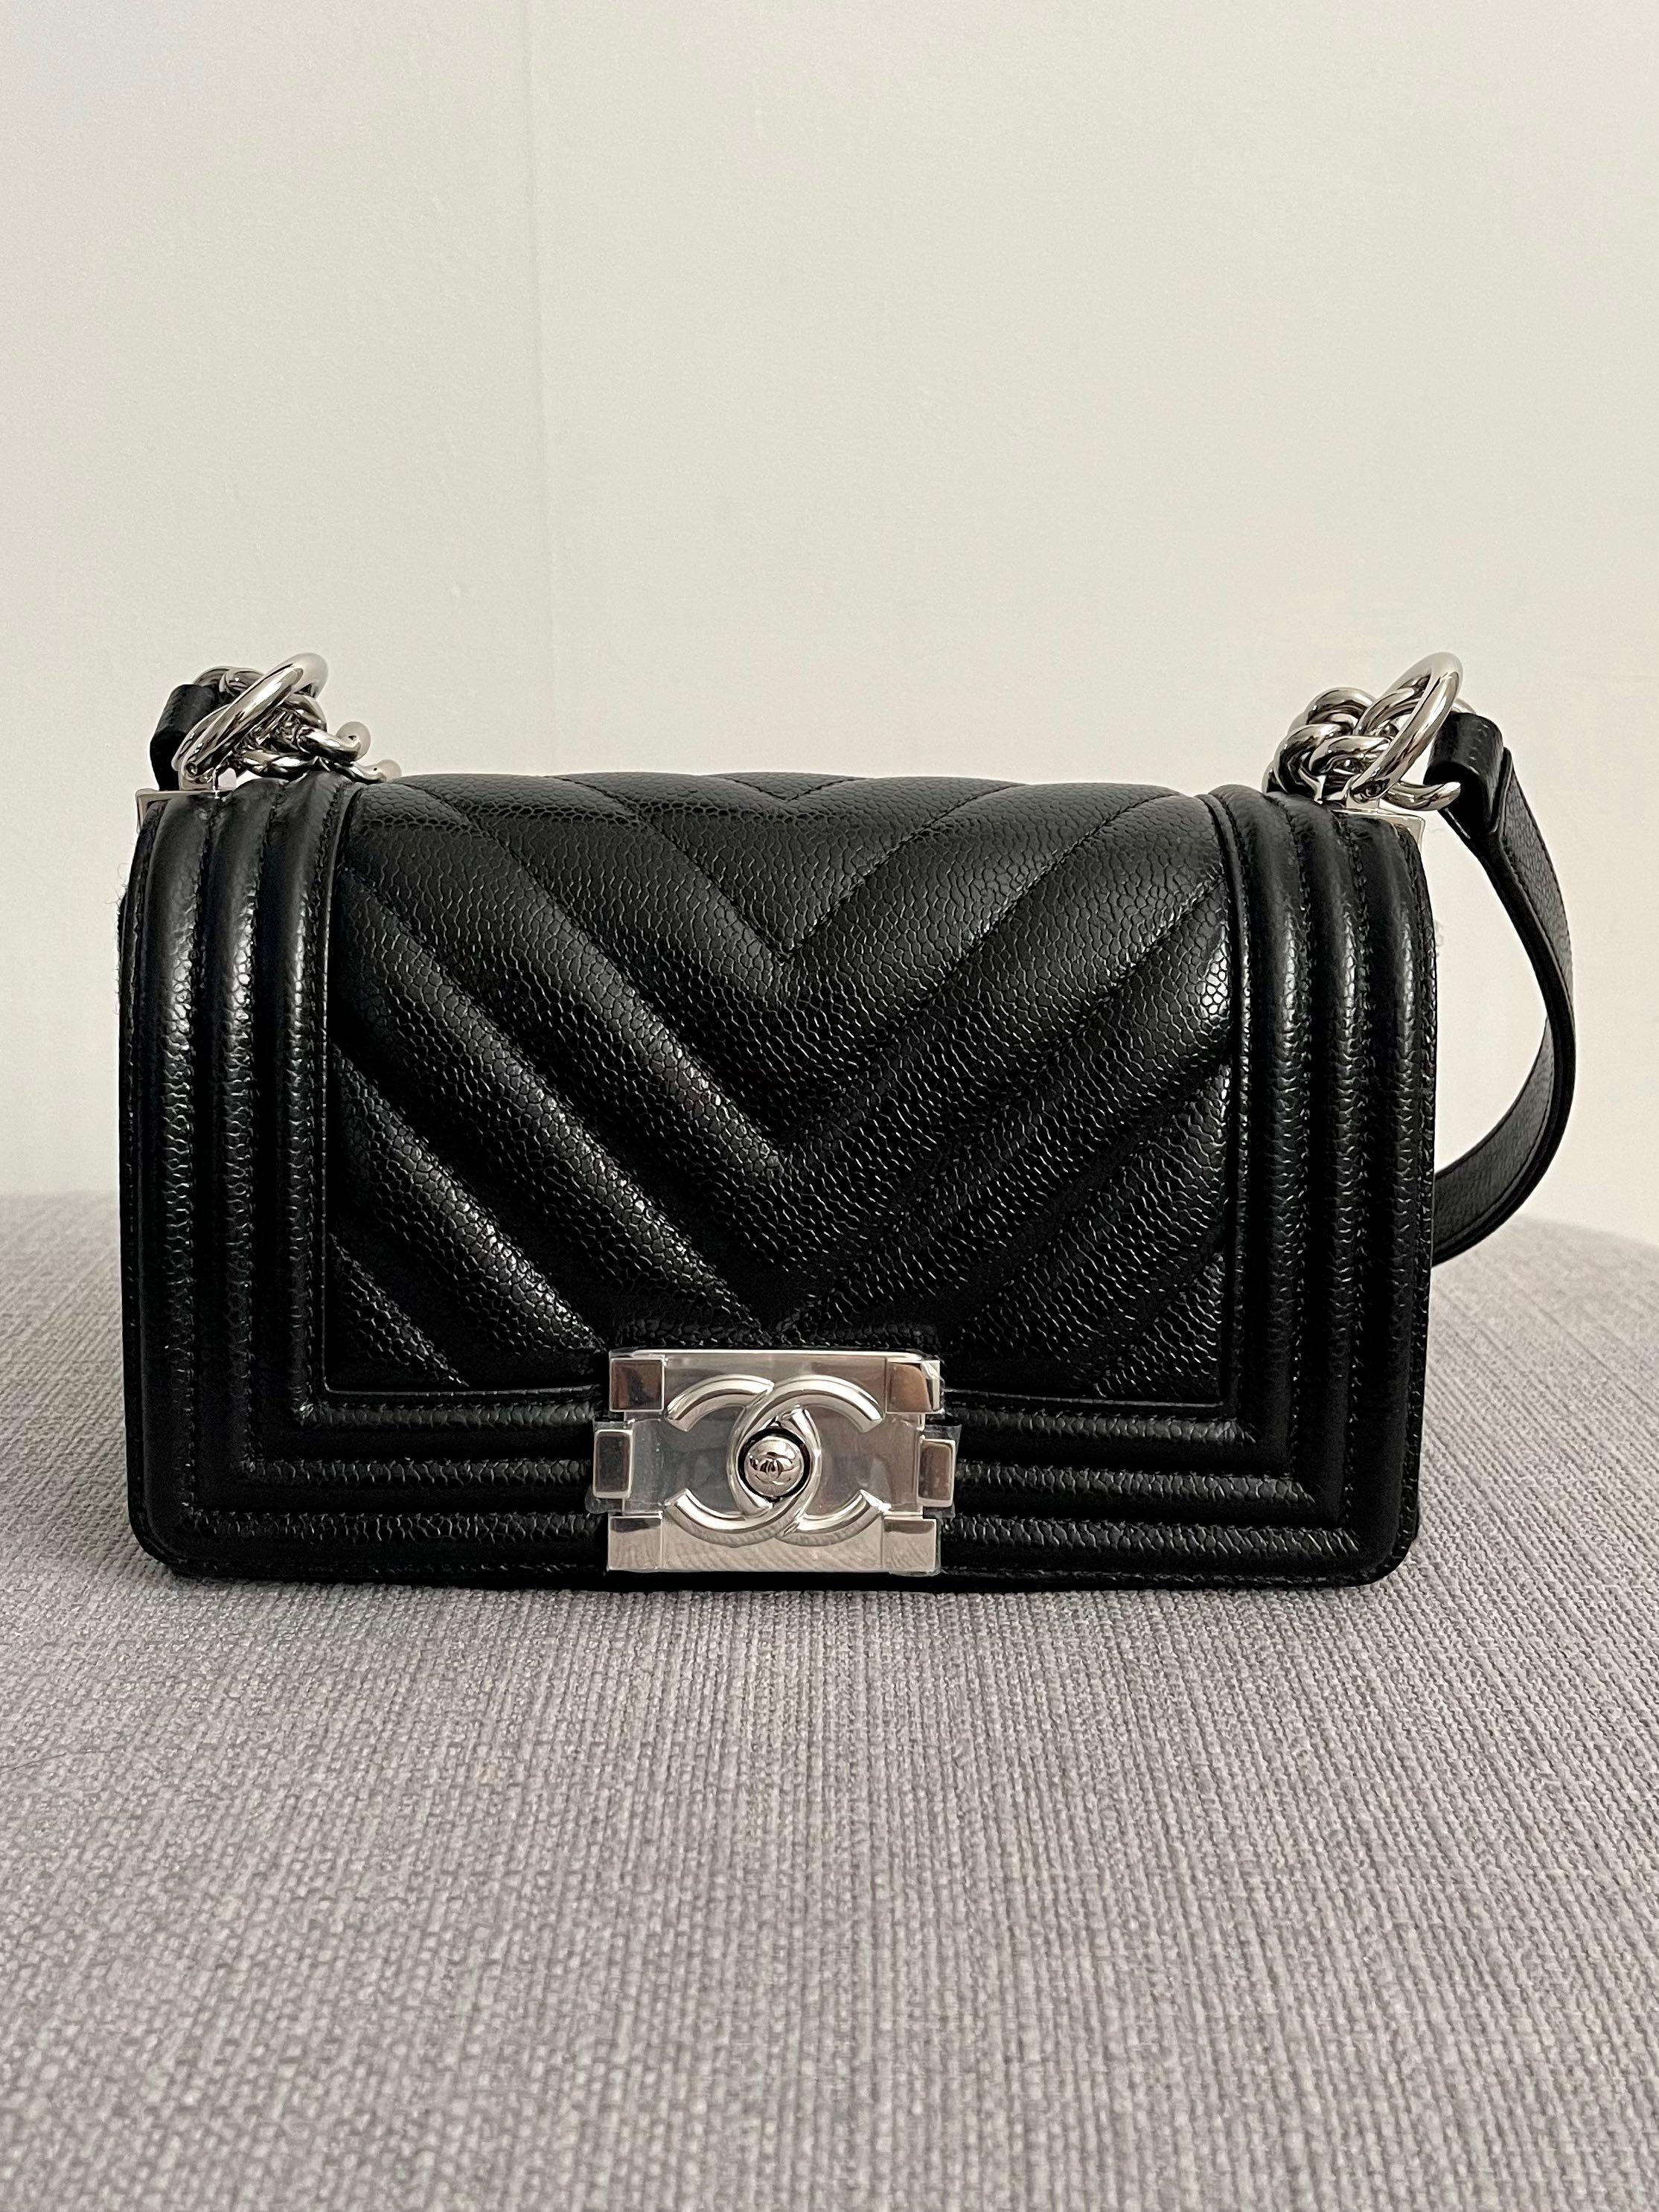 Chanel Boy Chevron Black Caviar with Ruthenium HardwareOld Medium size  for Sales Luxury Bags  Wallets on Carousell